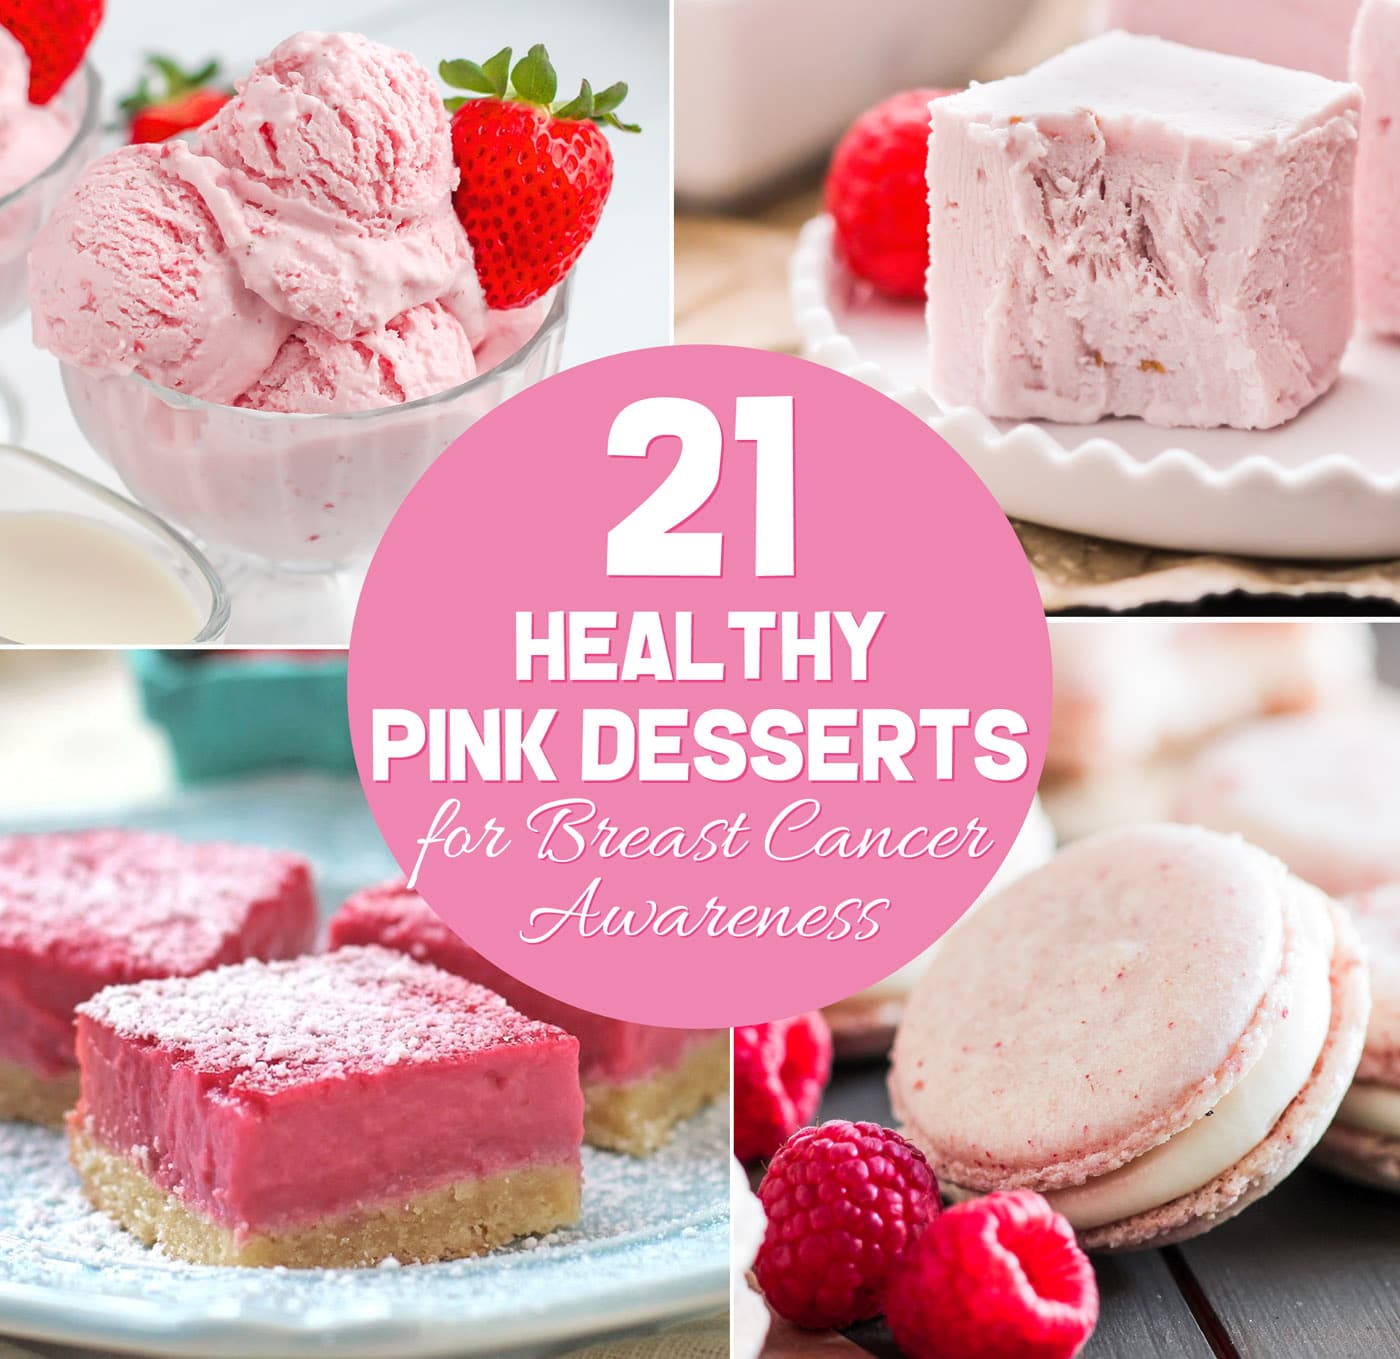 Have a pink October to honor Breast Cancer Awareness Month with these 21 healthy pink desserts! Make them for friends, family, neighbors, a school convention, fundraiser, or yourself! Cake to cupcakes to ice cream to milkshakes and more. Options for everyone: sugar free, low carb, low fat, high protein, high fiber, whole grain, gluten free, dairy free, vegan, paleo, or keto. #glutenfreedessert #vegandessert #highprotein #healthycake #glutenfreecake #sugarfreecake #lowcarbicecream #ketofudge